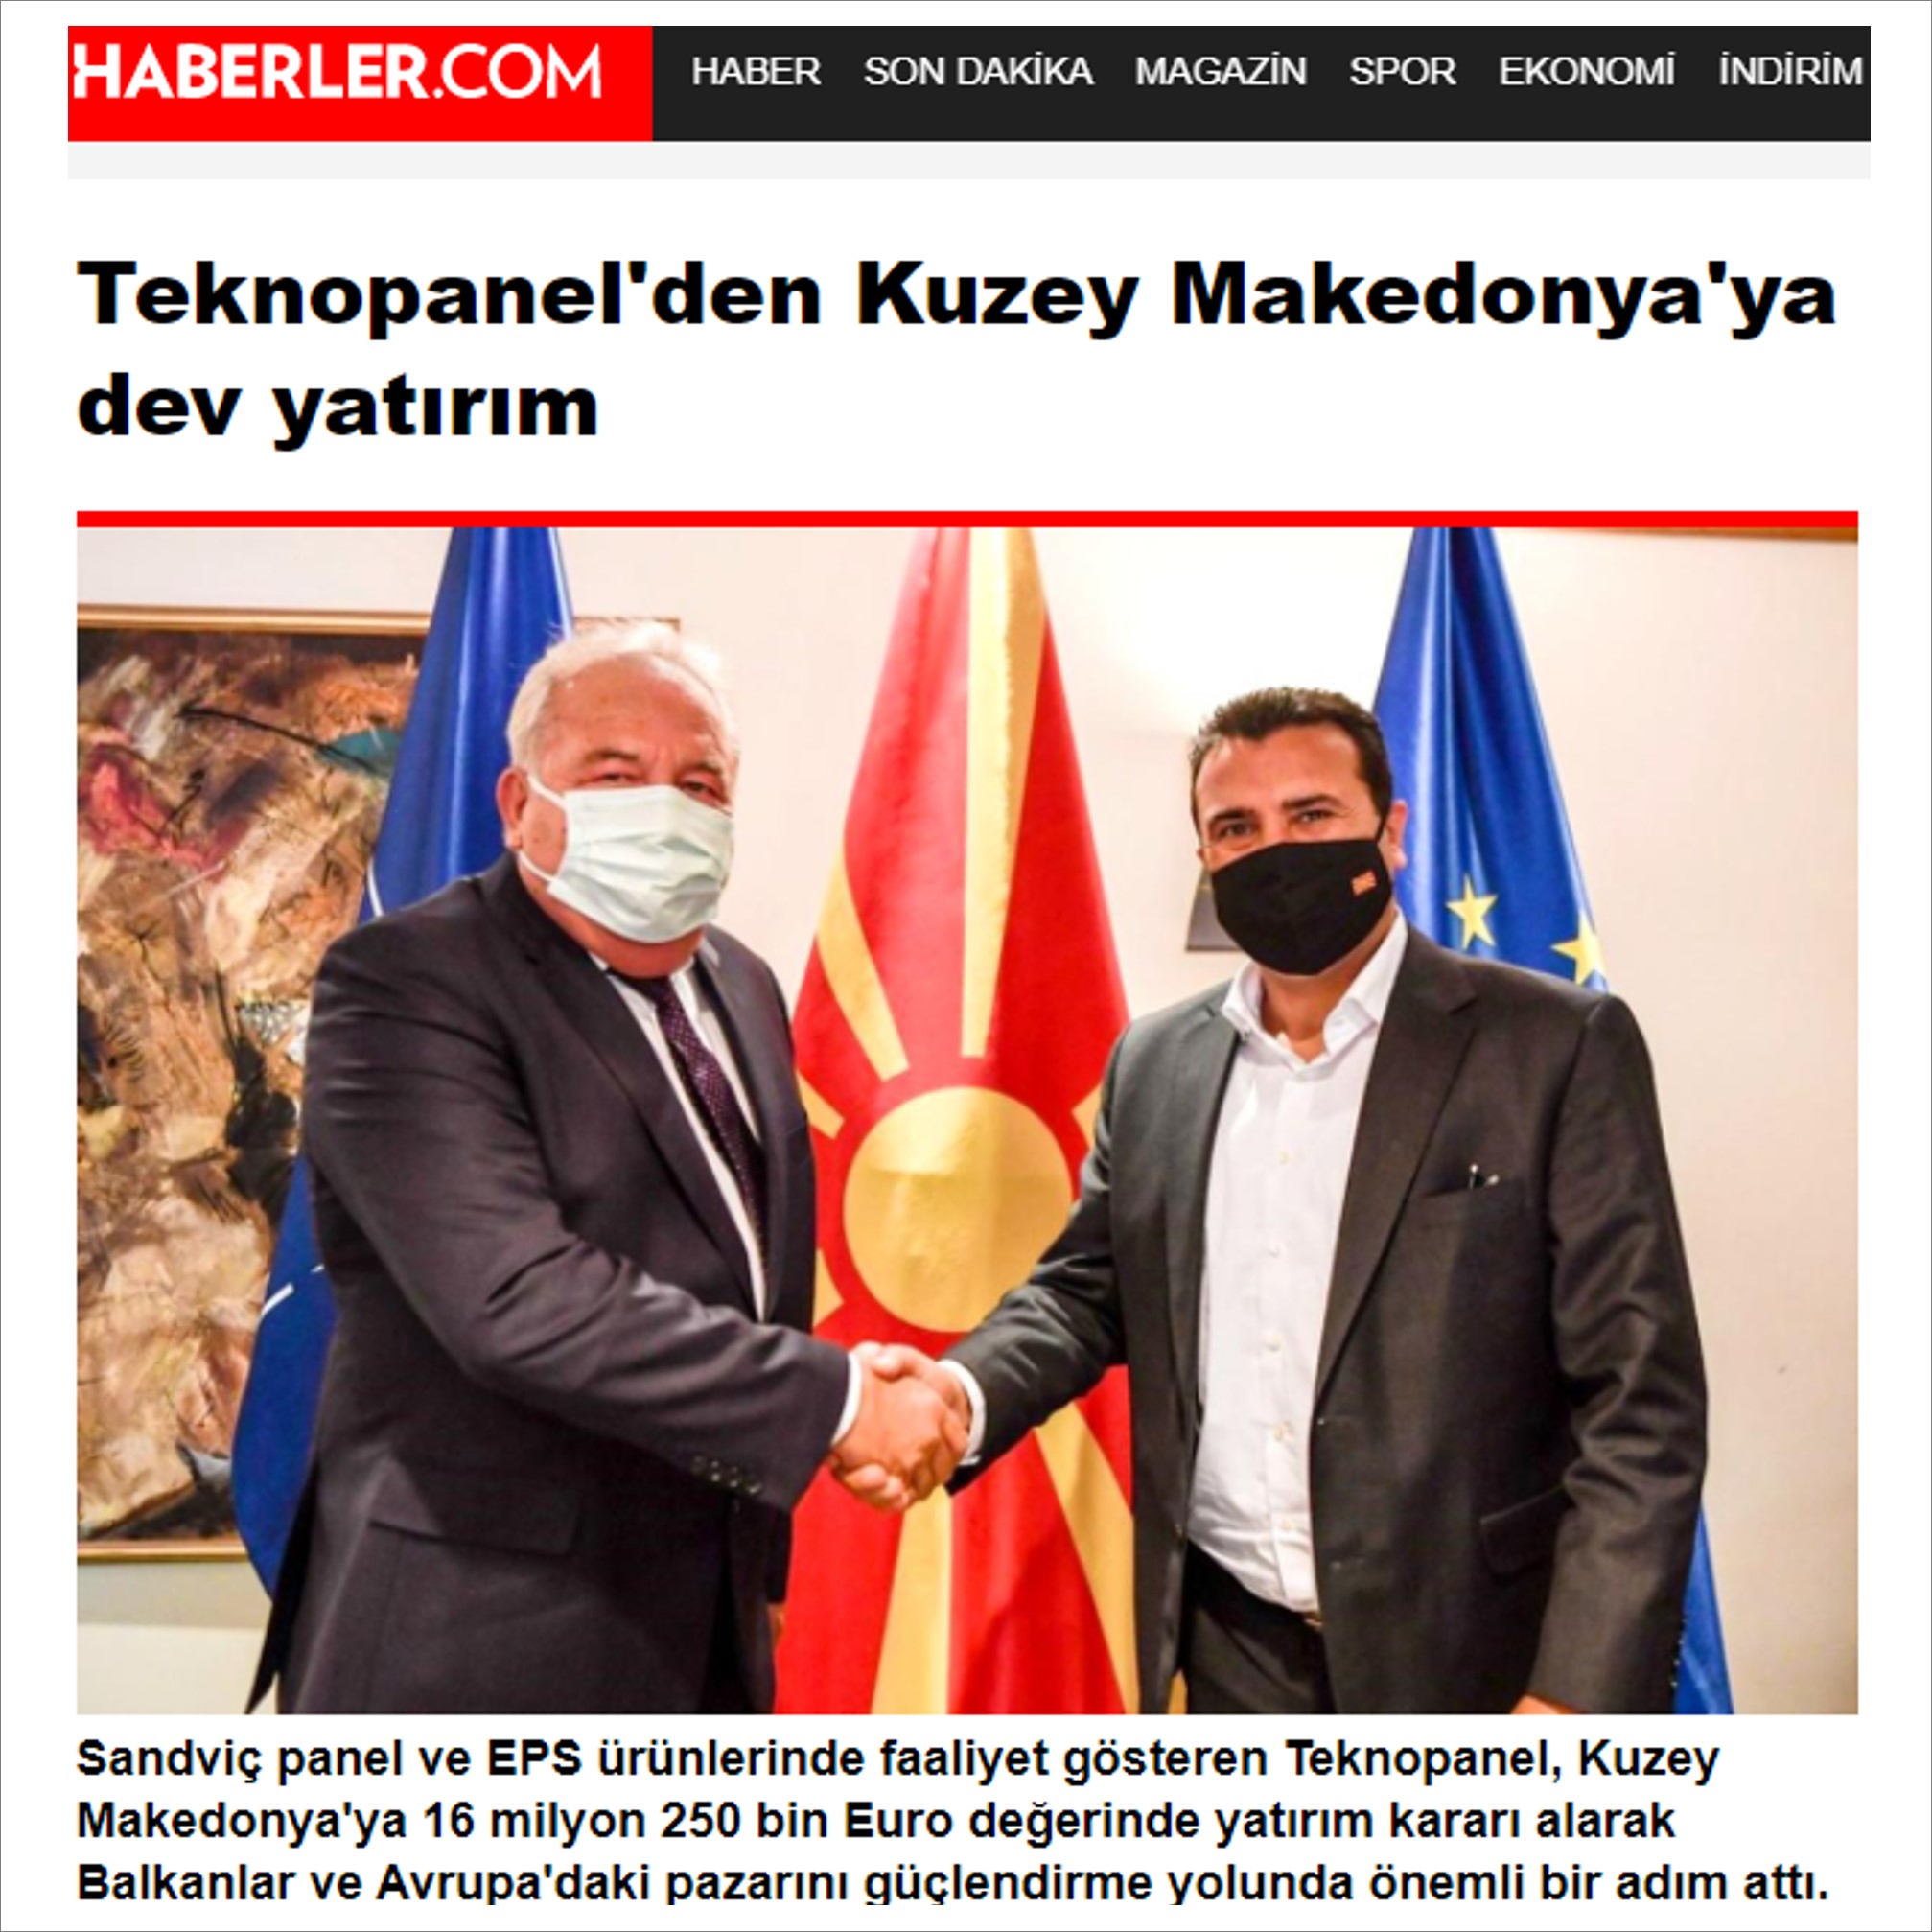 Haberler.com-"Huge Investment Decision from Teknopanel to North Macedonia"